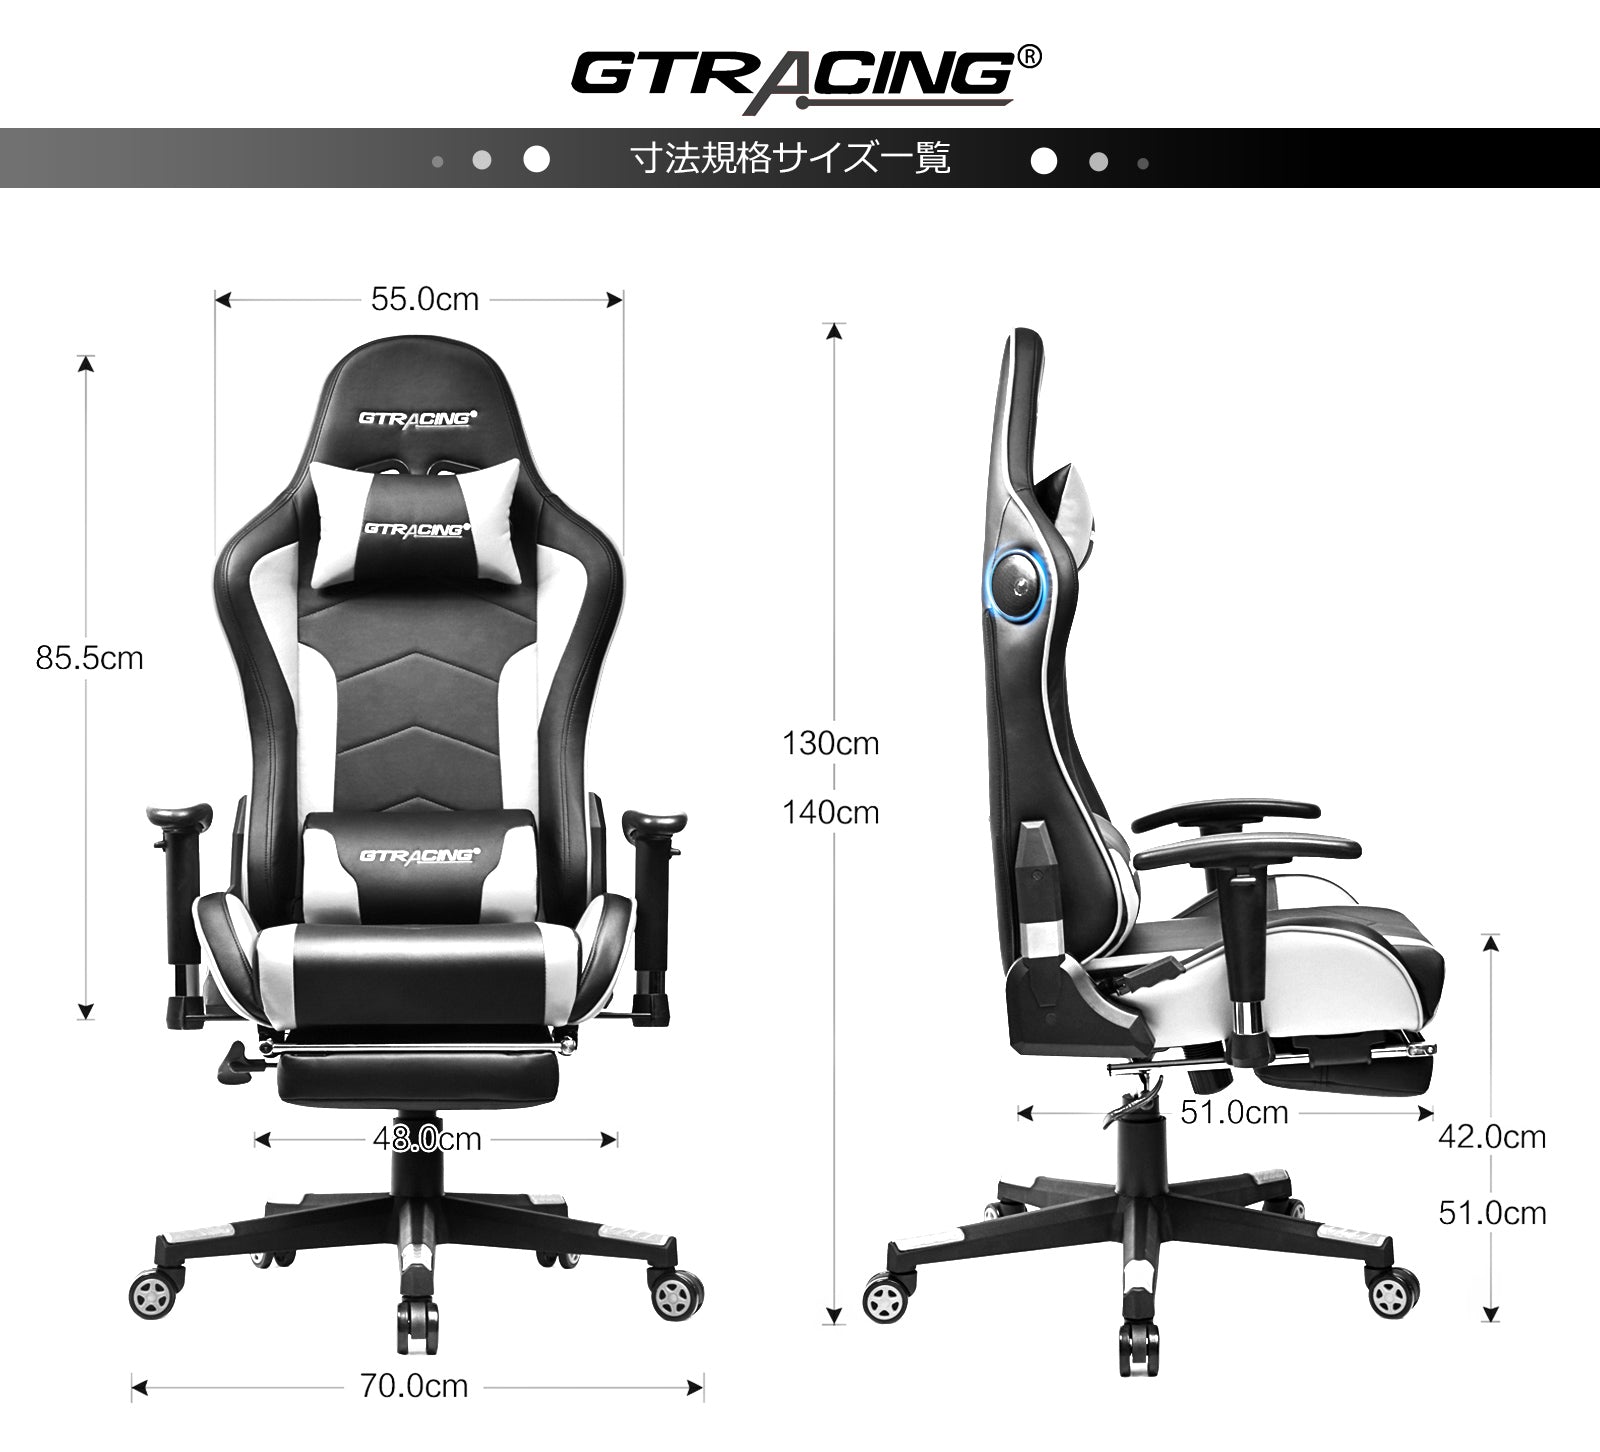 GT890MF-RED Gaming Chair with Speaker | GTRACING